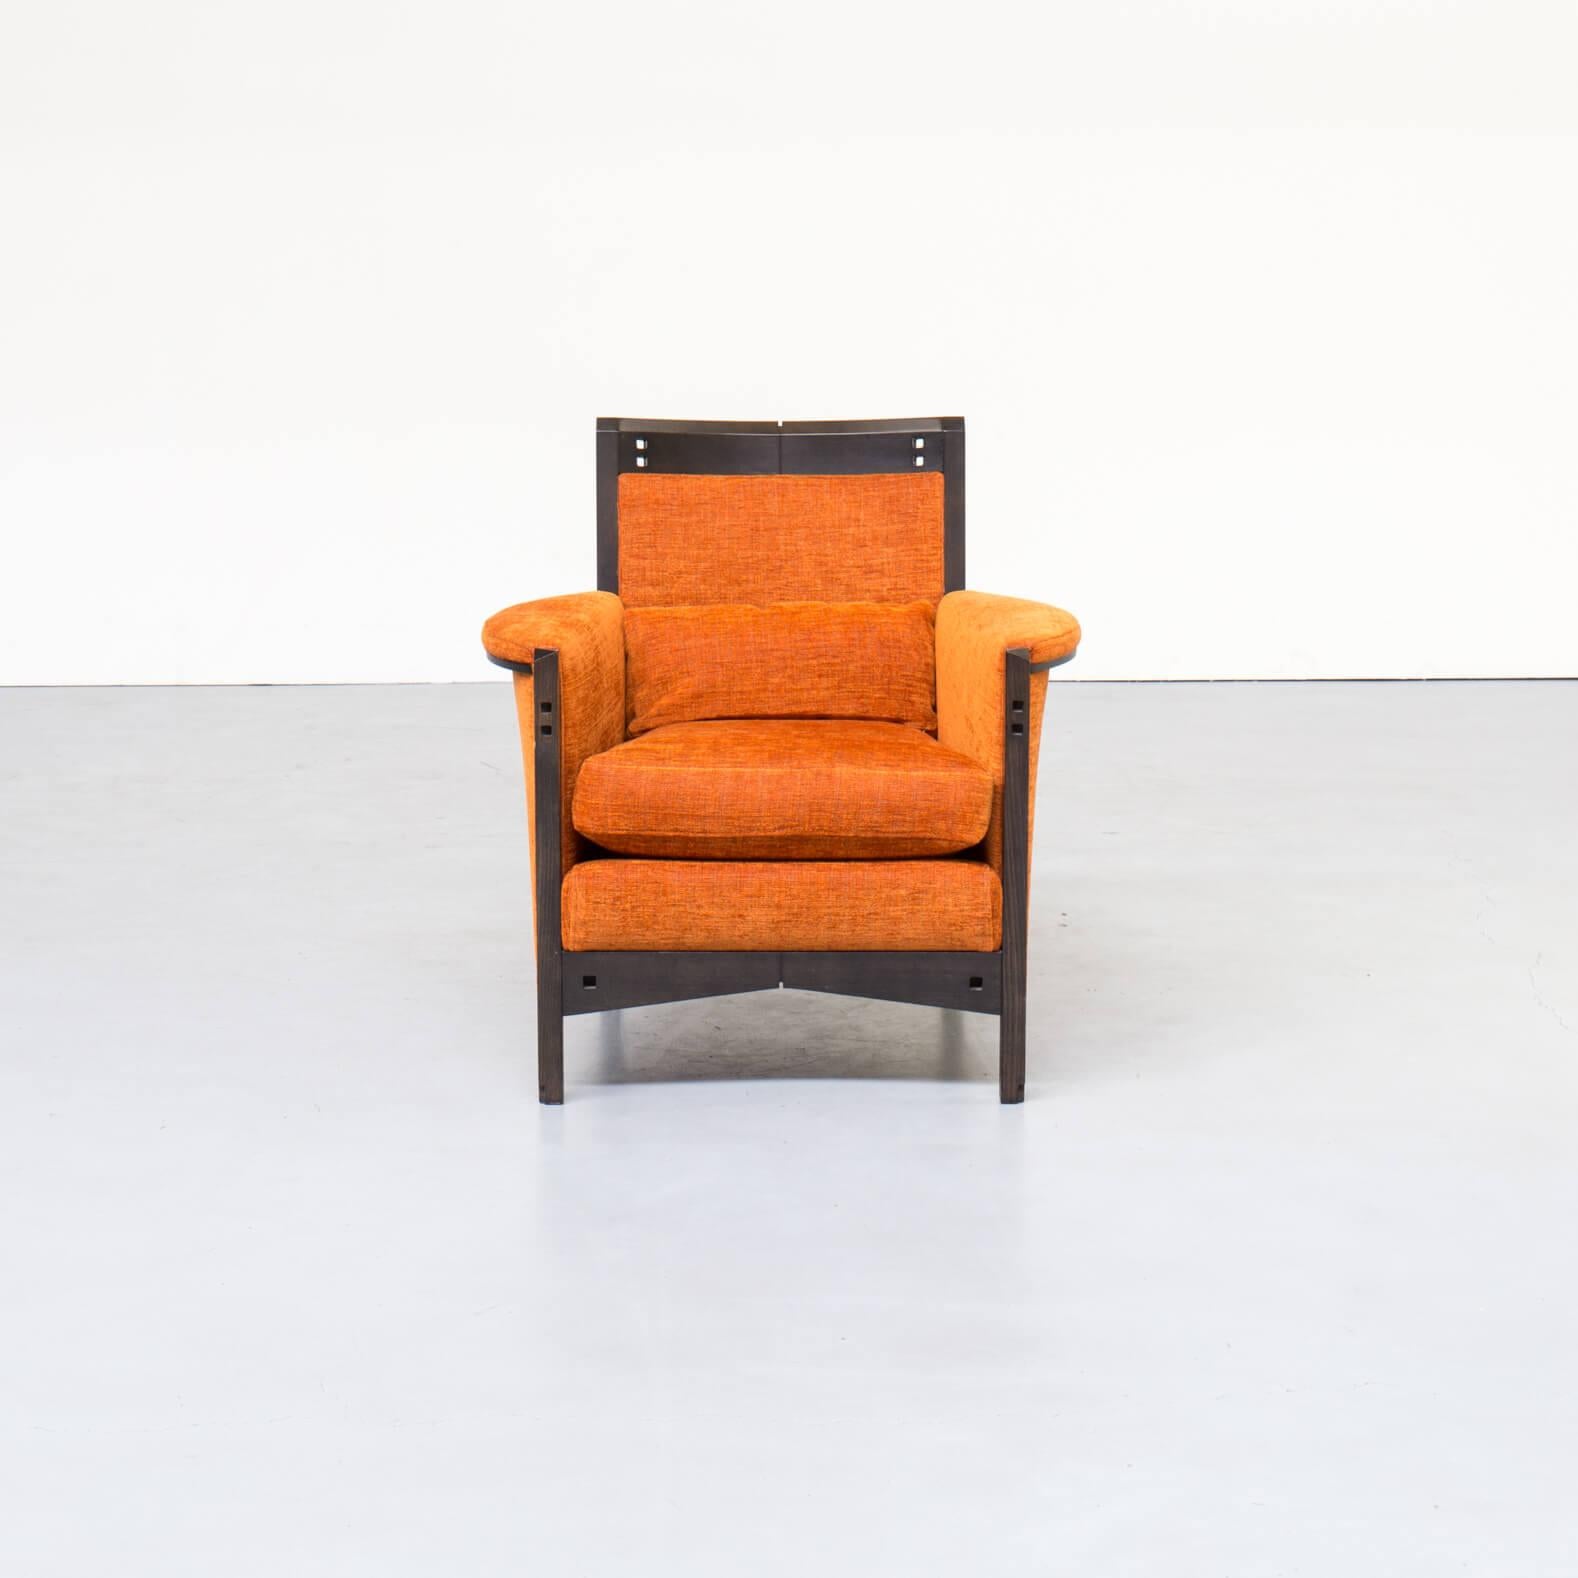 Beautiful designed lounge fauteuil by Umberto Asnago for Giorgetti. Very detailed wood, and nice orange fabric in good condition consistent with age and use.